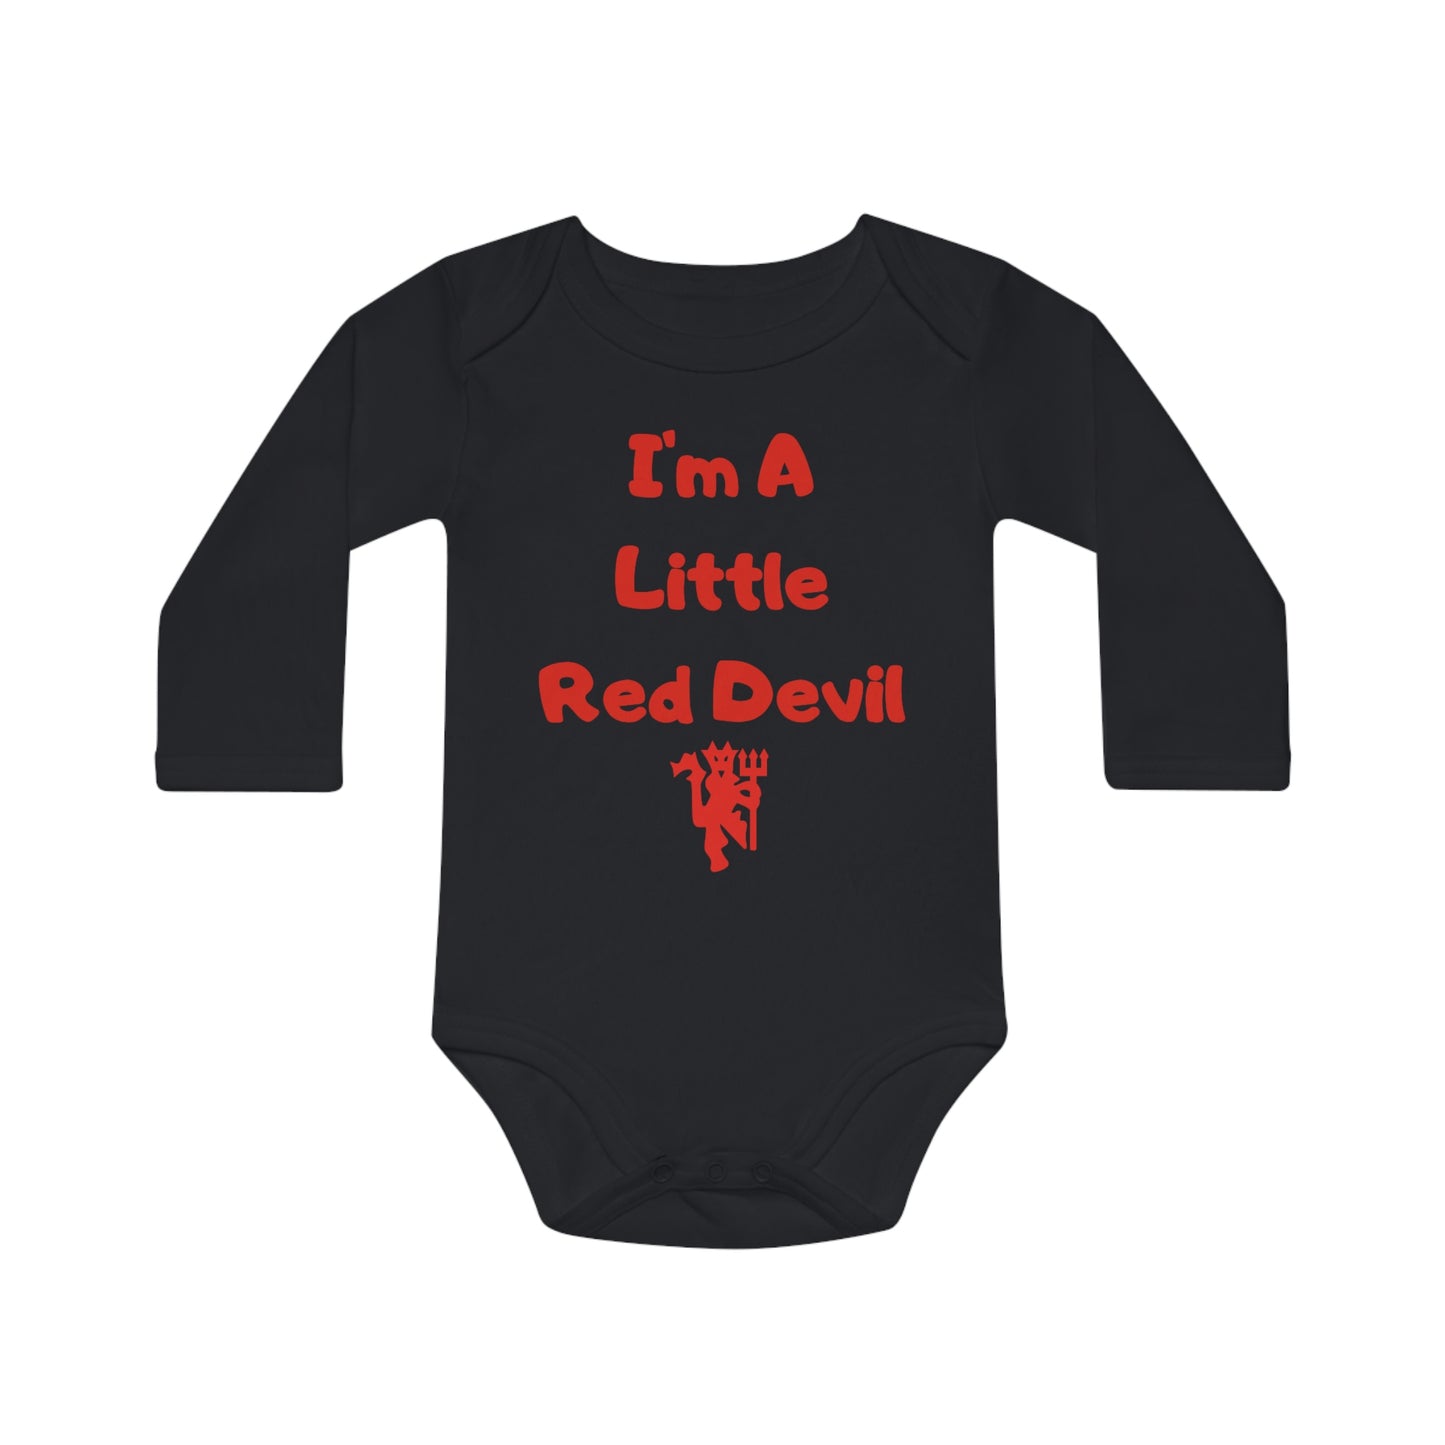 I'm A Little Red Devil - Manchester United Supporter Body